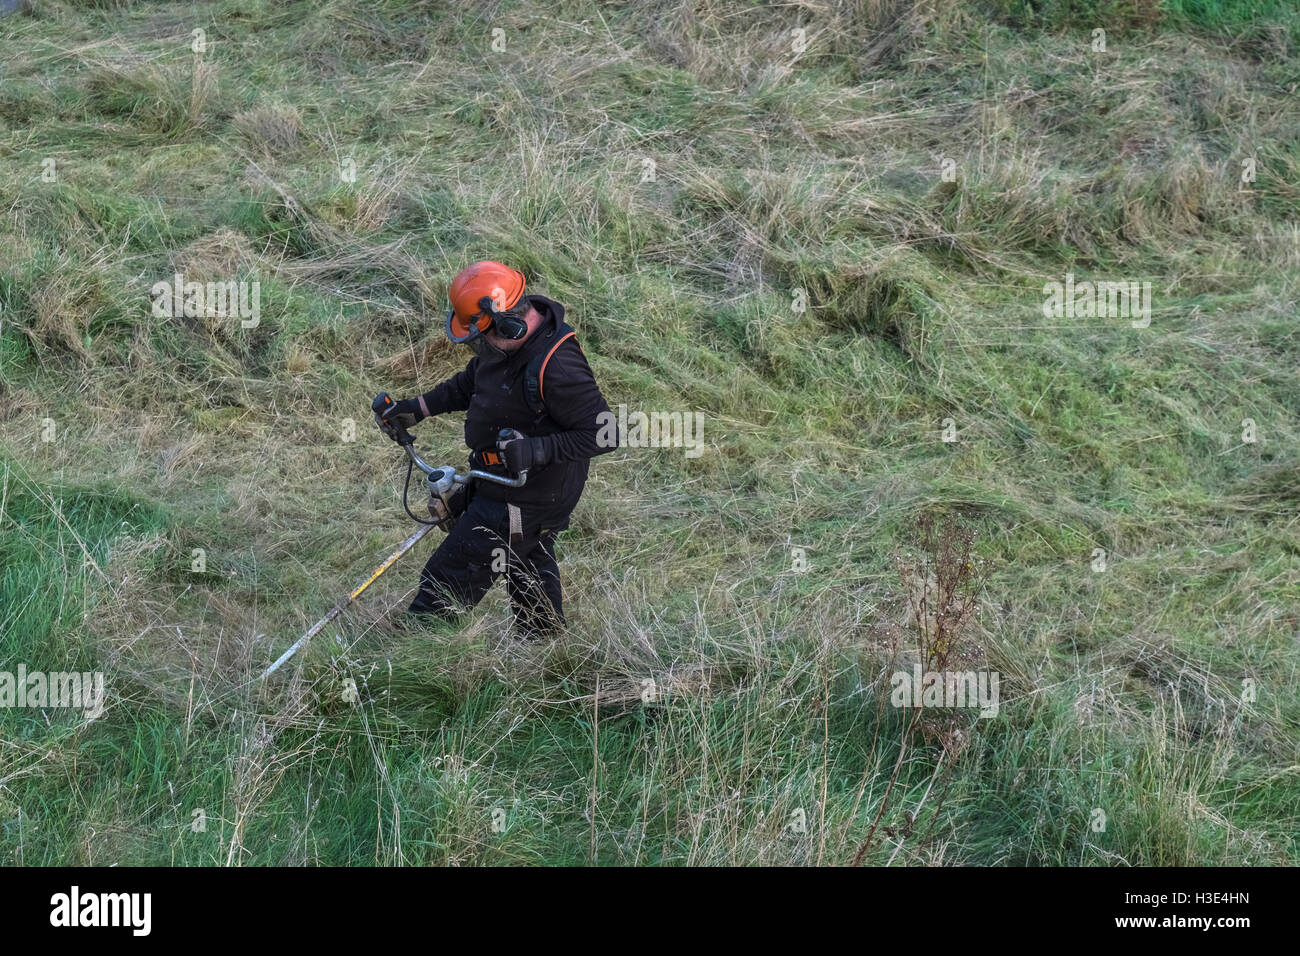 Man with protective clothing using powered grass trimmer to cut long grass. Stock Photo